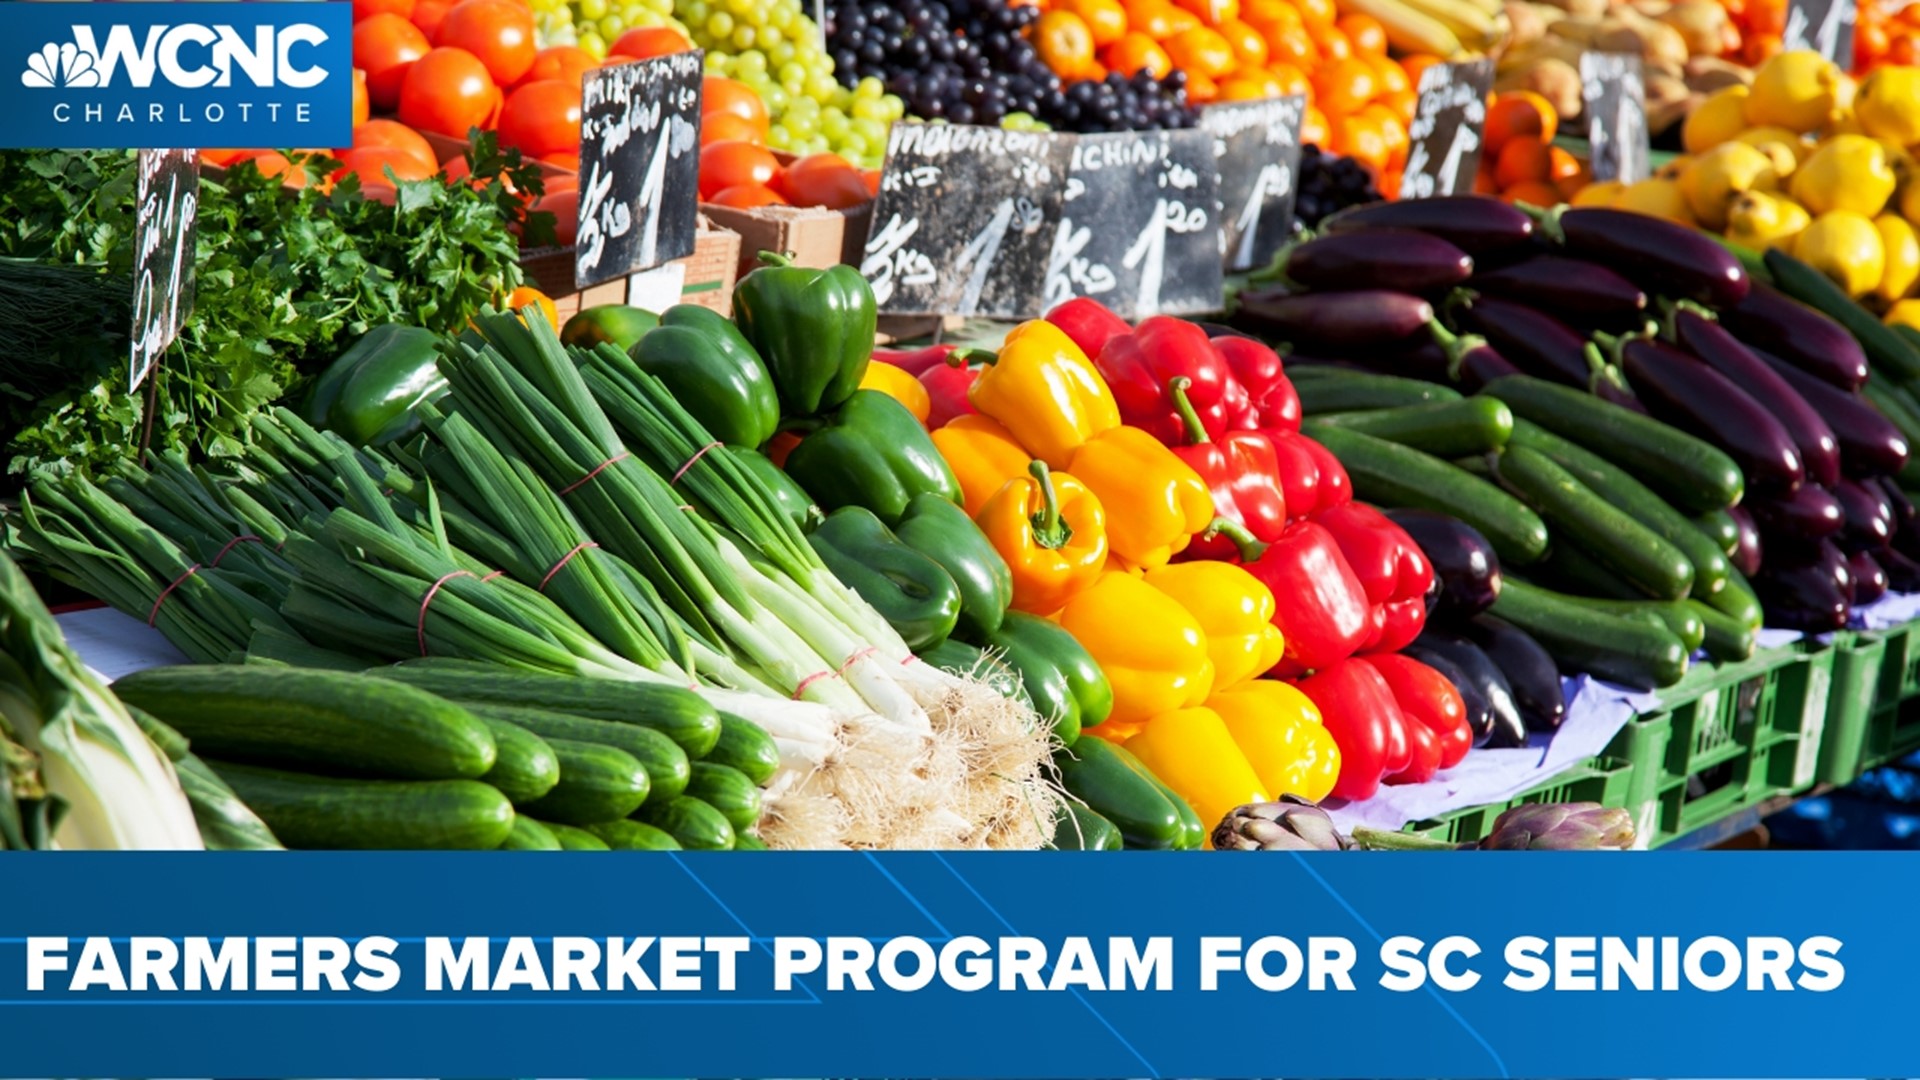 This week -- the state is accepting new applications for the 'Senior Farmers market nutrition program'.